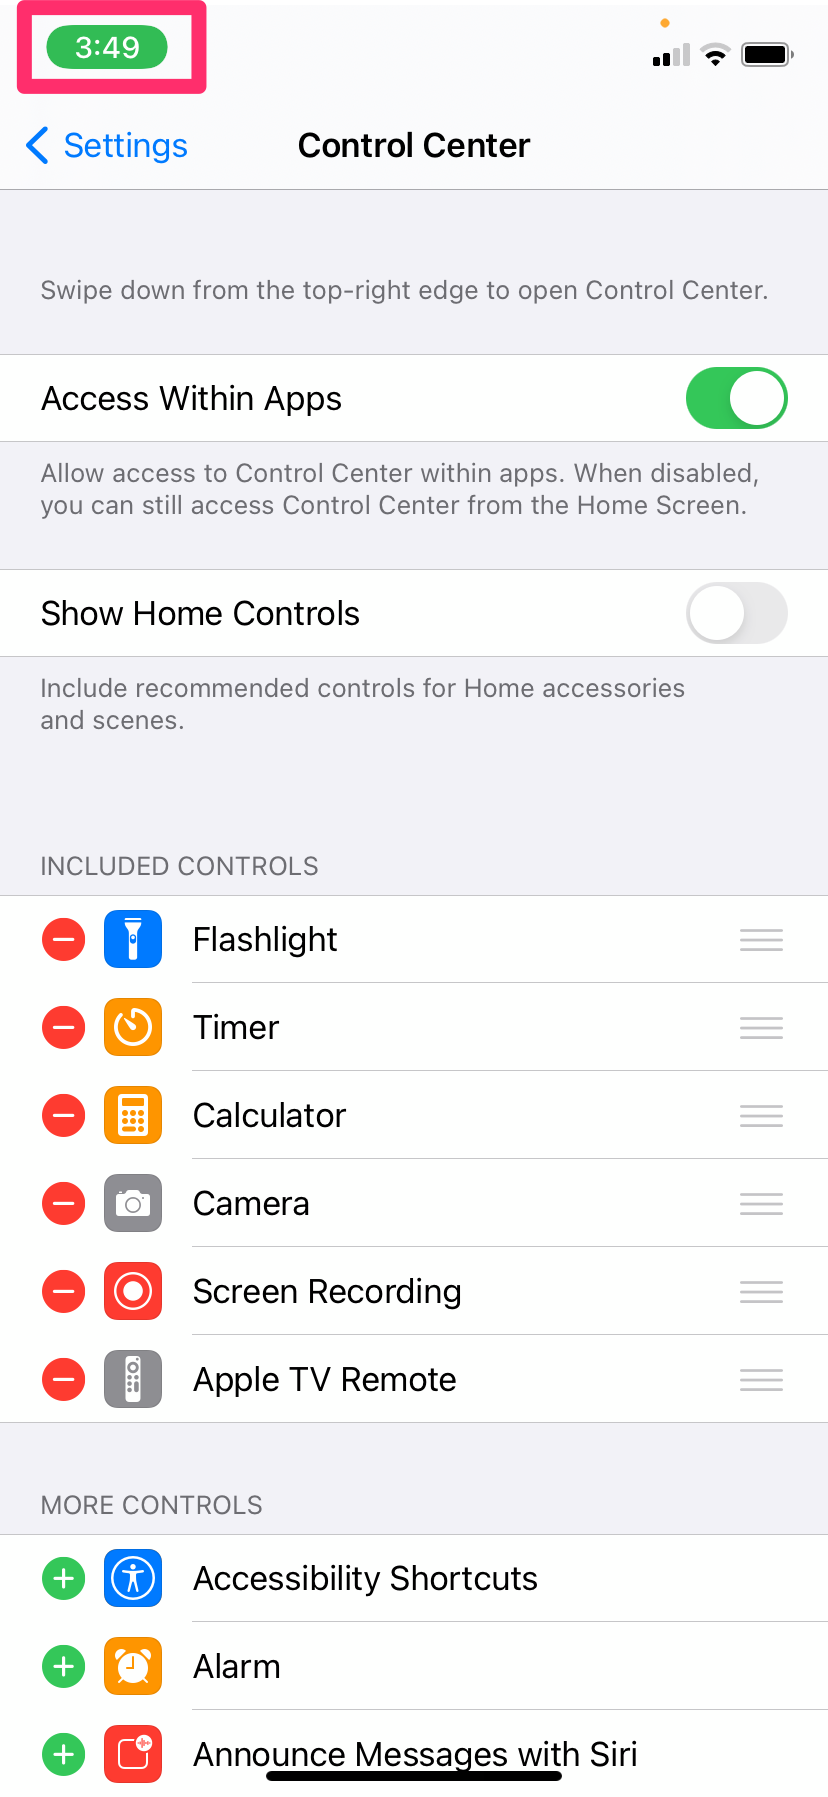 Screenshot of the Control Center where you find a list of included controls and more controls.